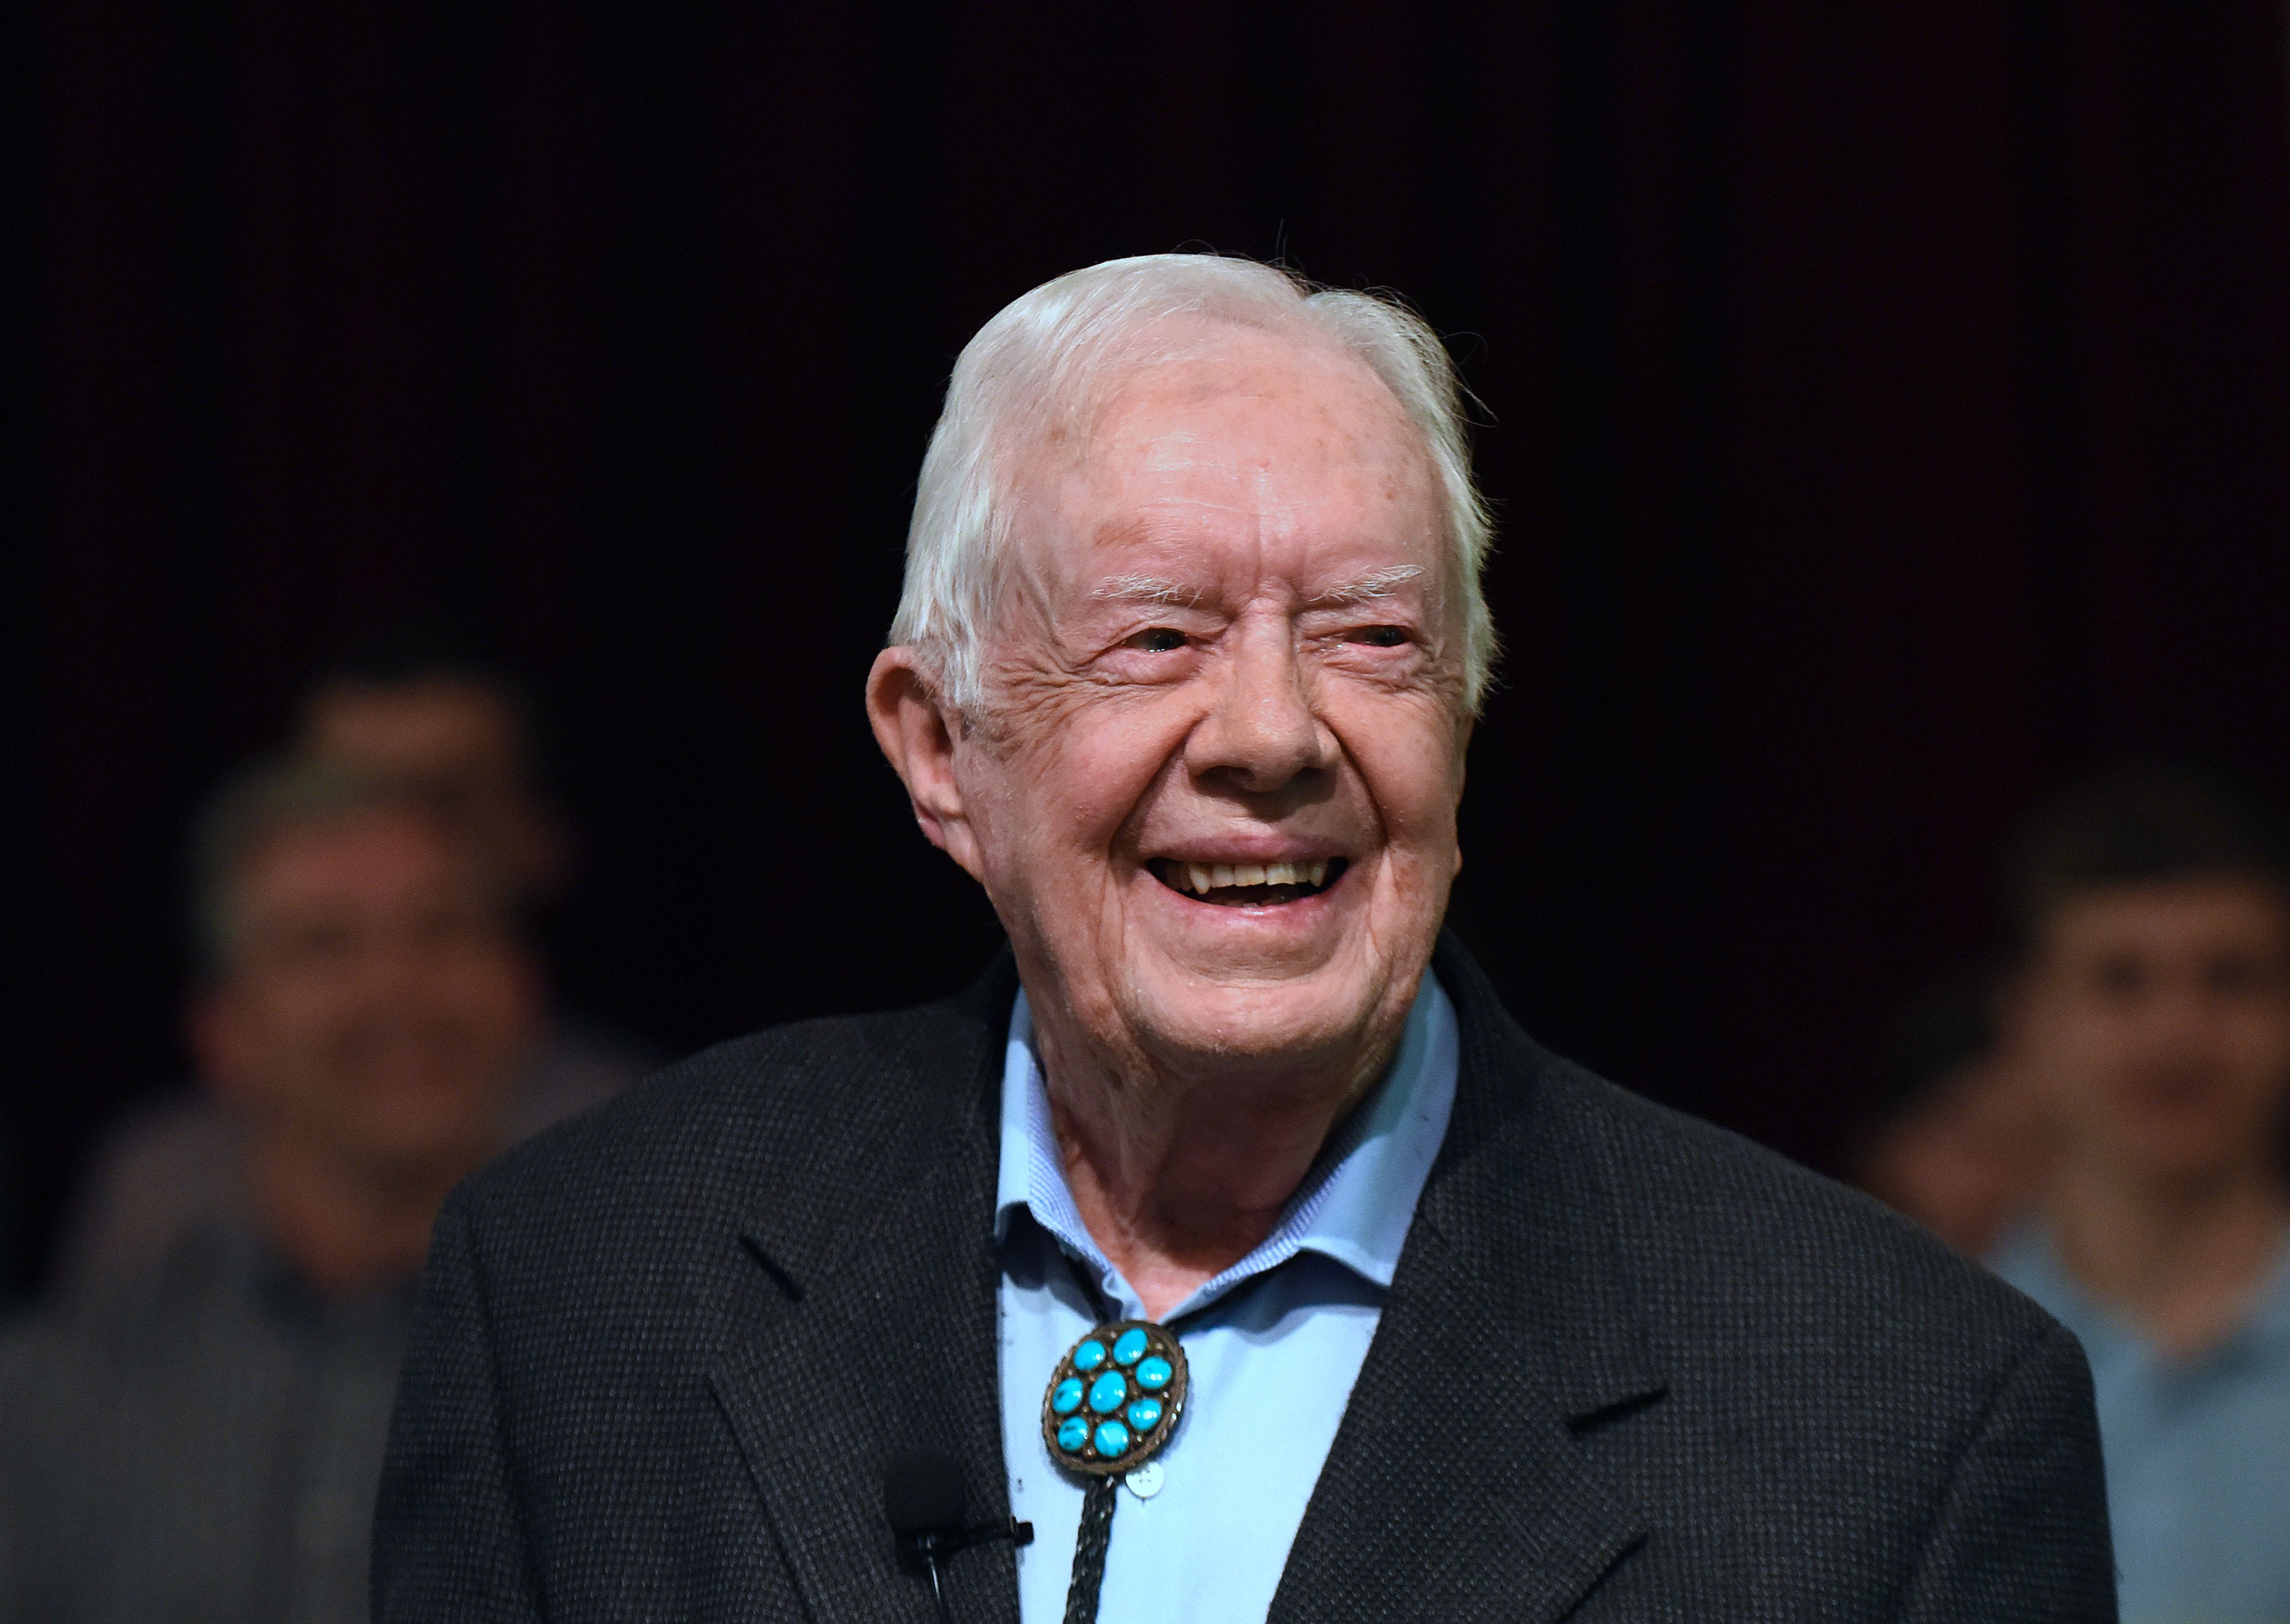 Jimmy Carter says he was at ease" with death after cancer